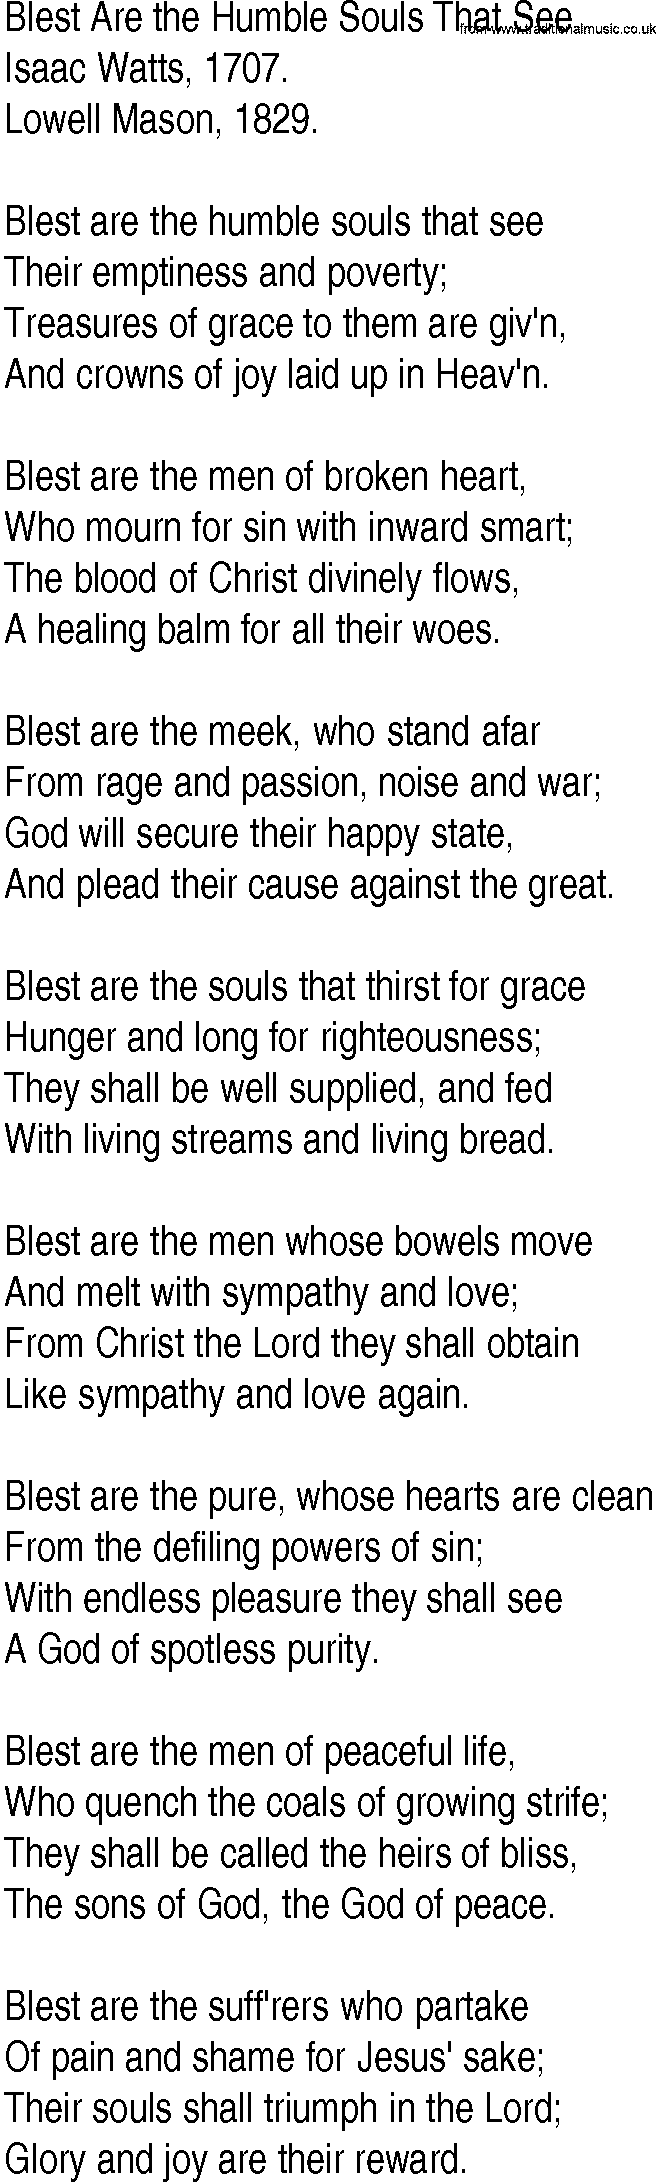 Hymn and Gospel Song: Blest Are the Humble Souls That See by Isaac Watts lyrics